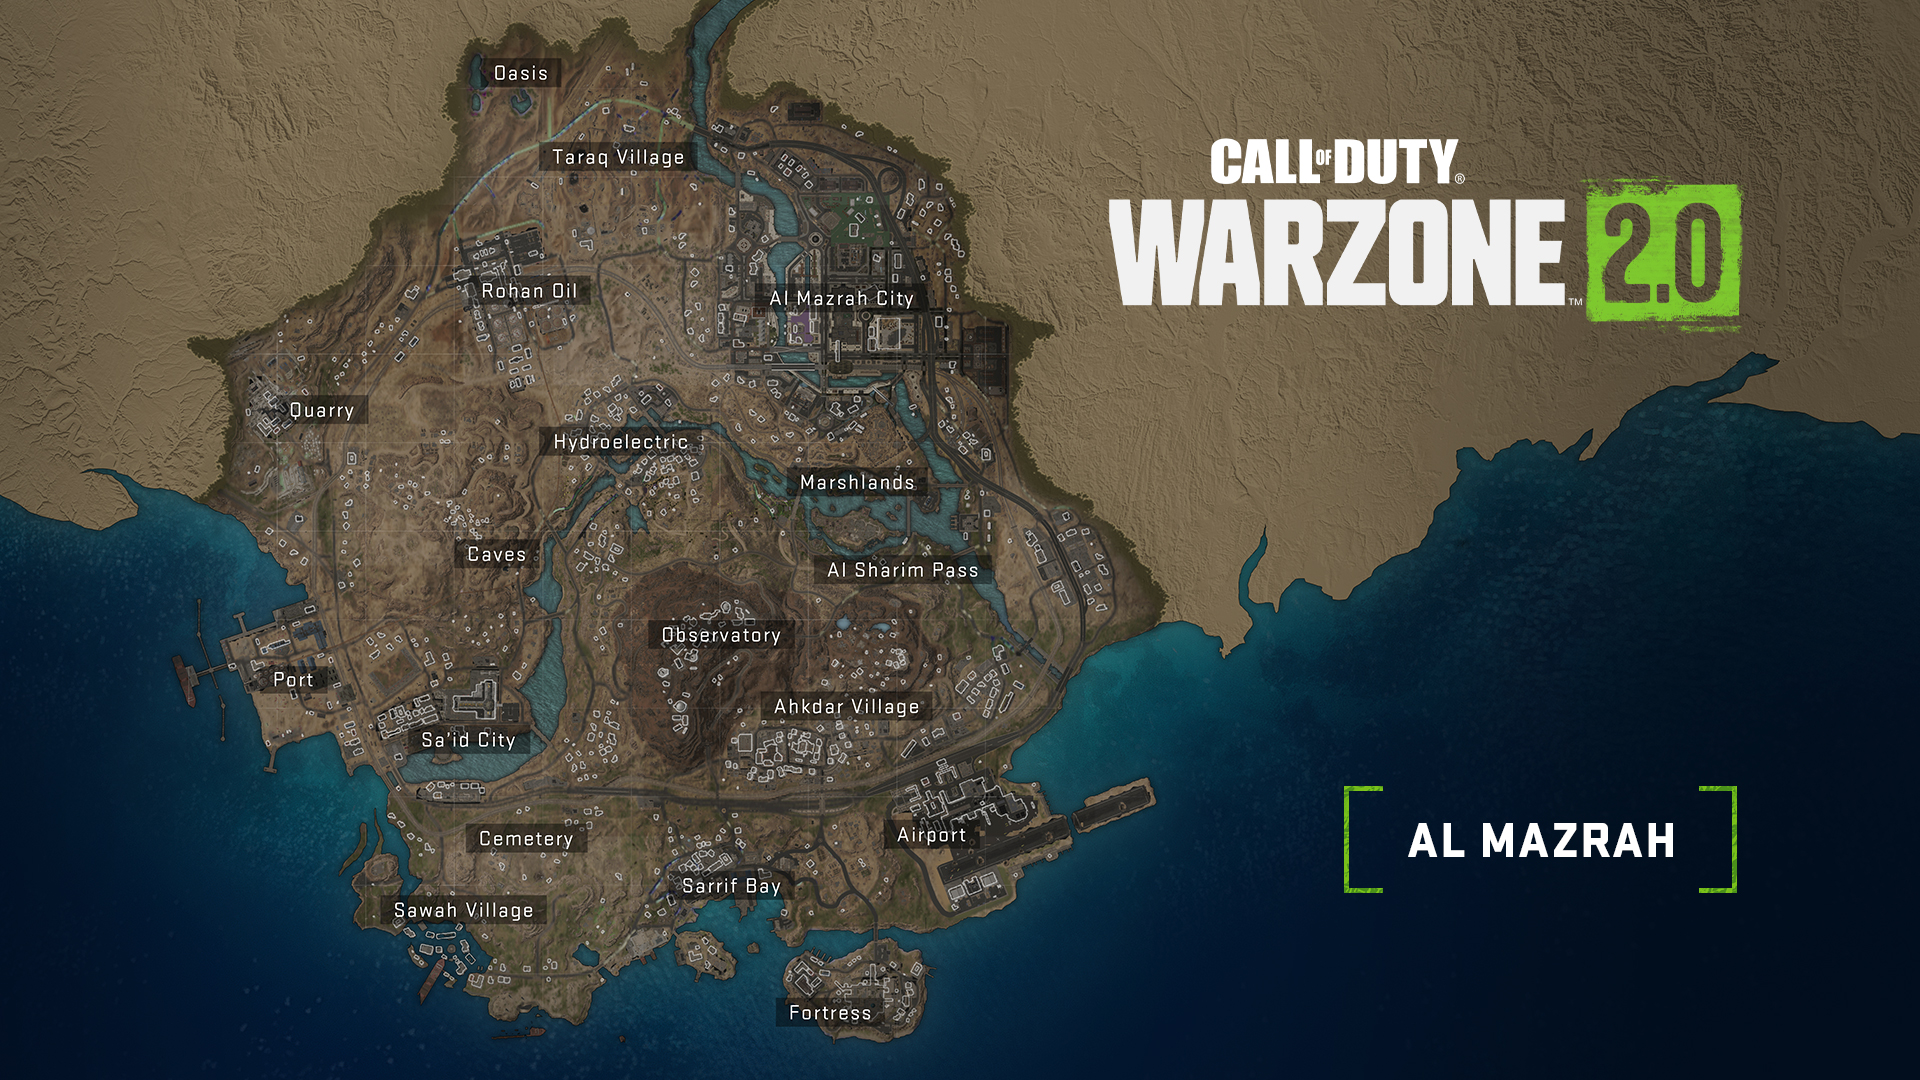 Call of Duty Warzone 2.0 map reveal